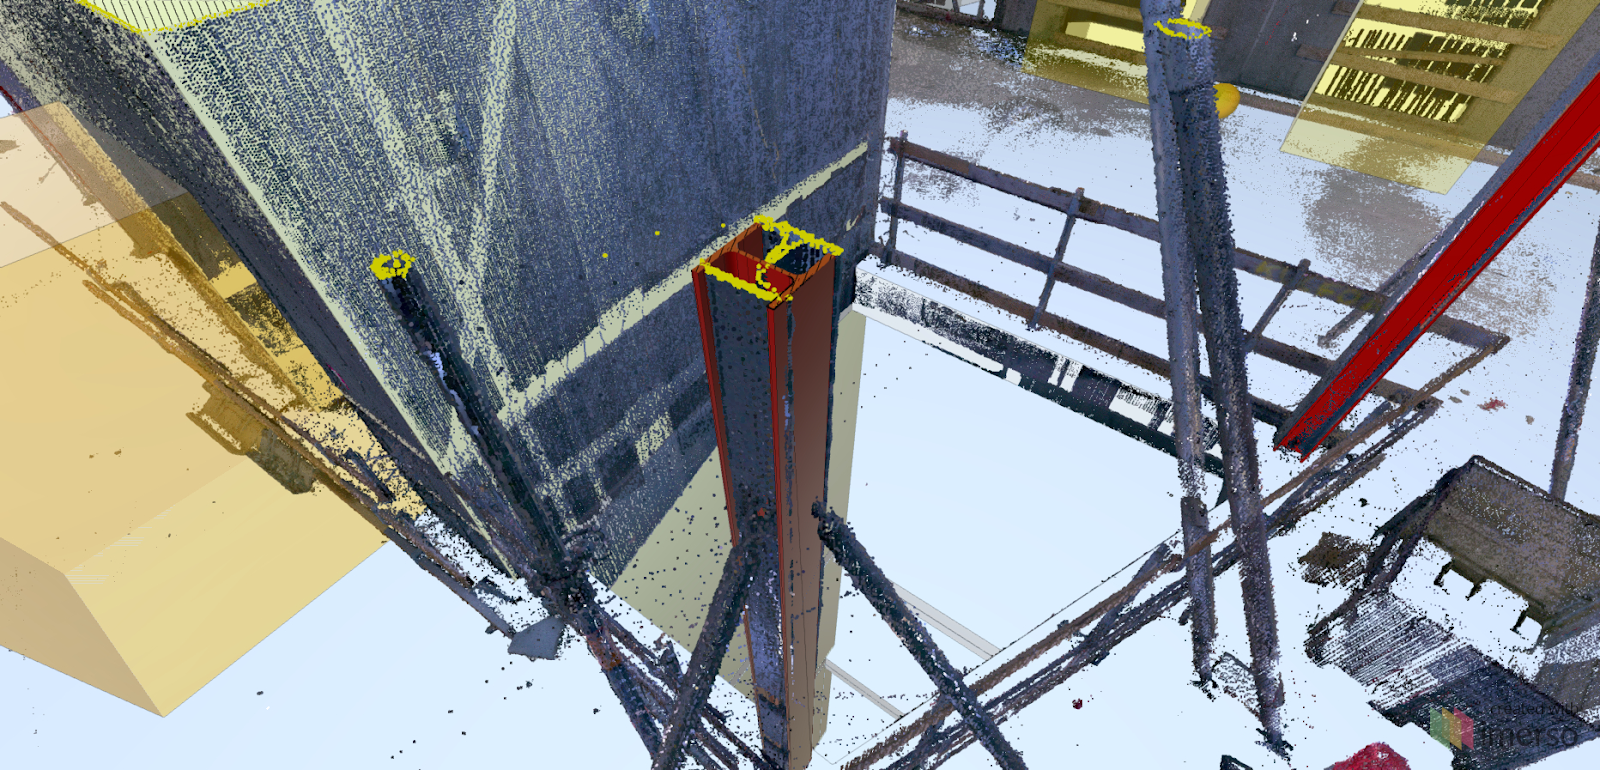 Construction site deviation detection: Steel column installed on-site with a 90º rotation.